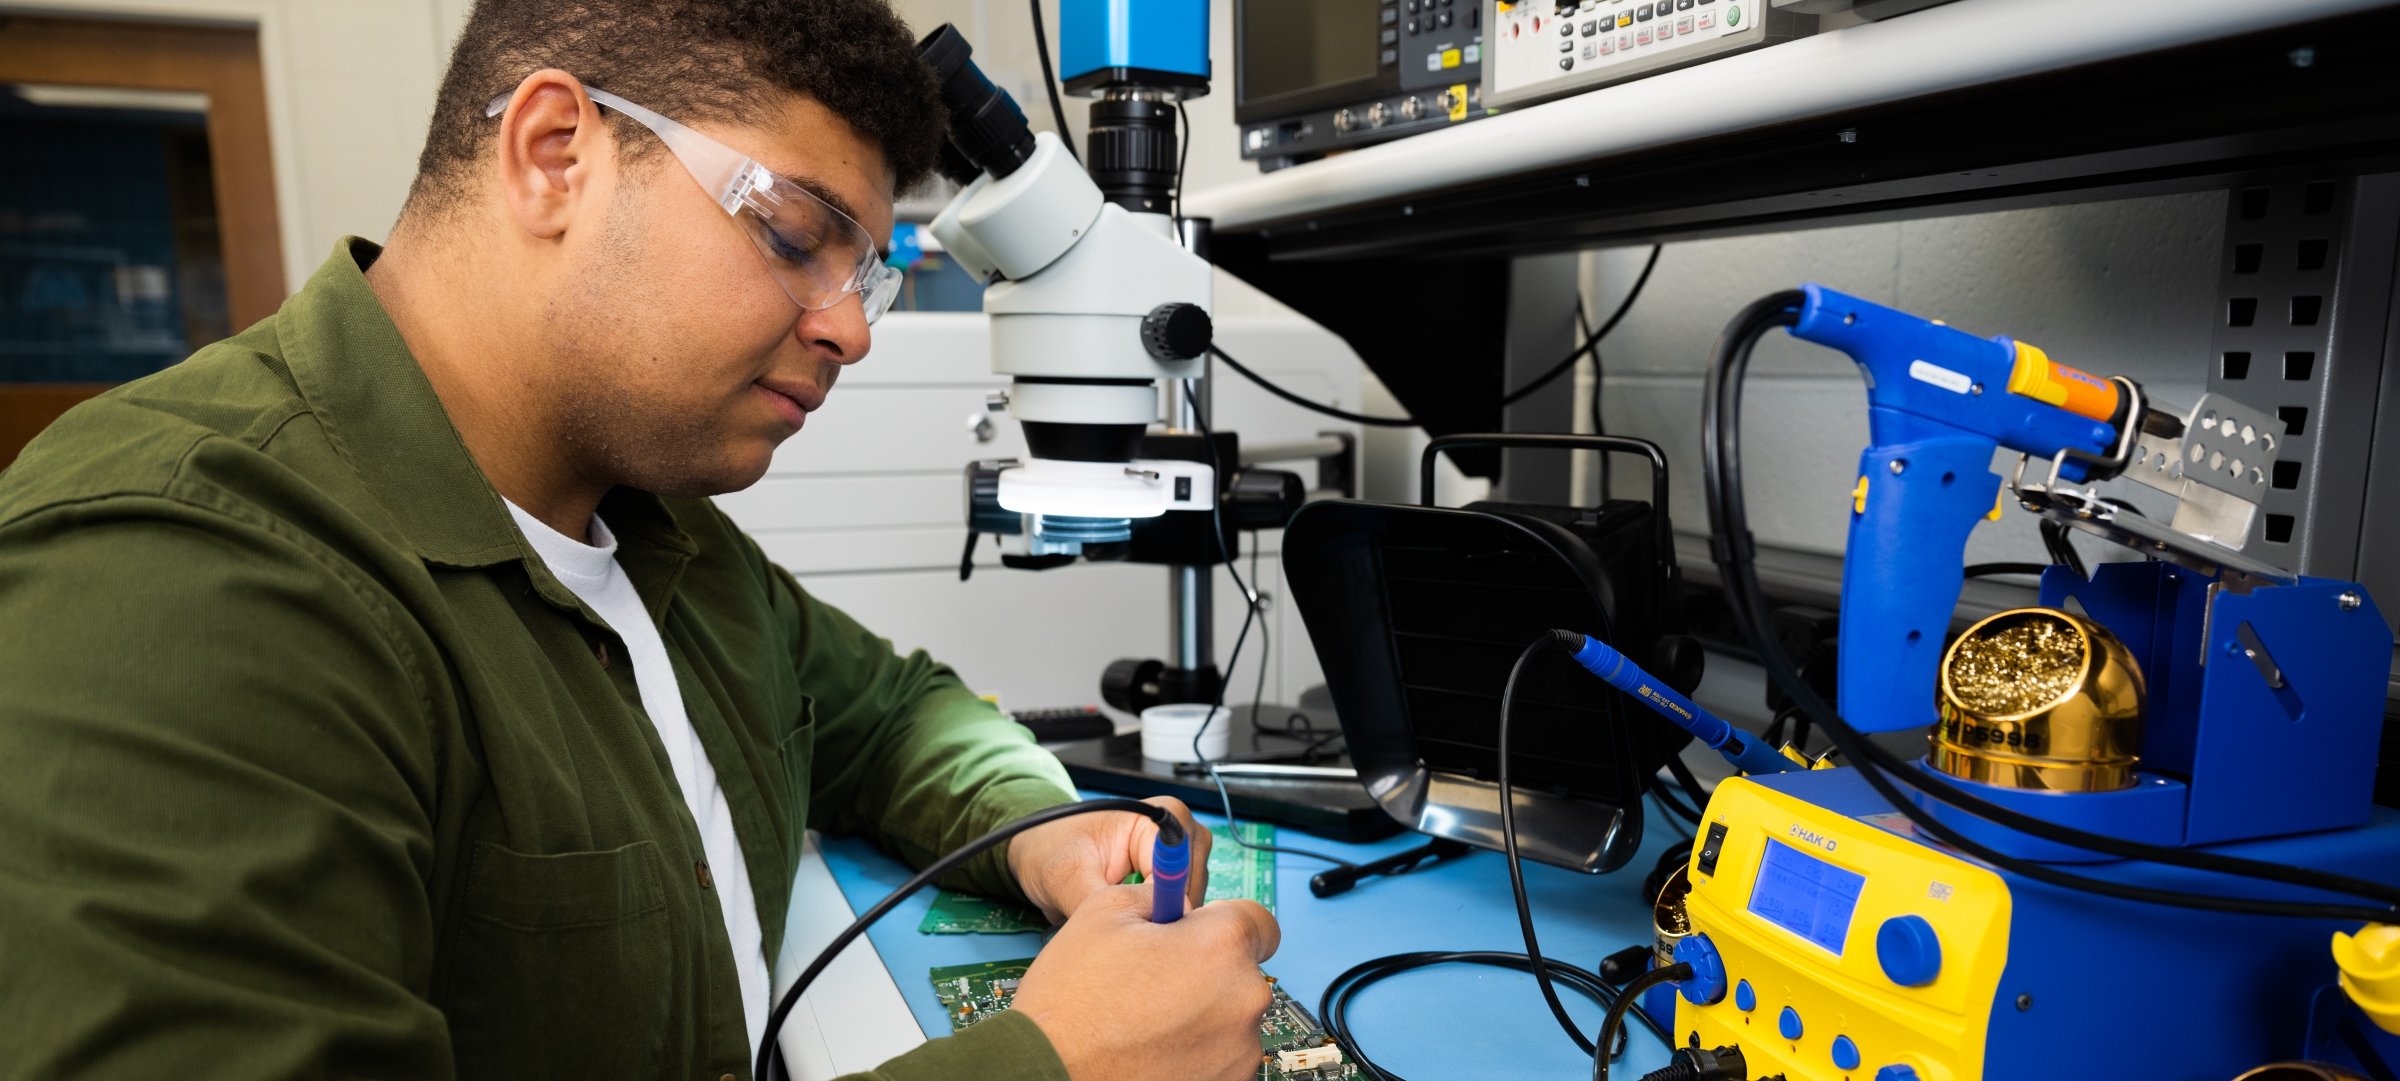 A student of color uses a soldering tool on a circuit board while wearing safety glasses.